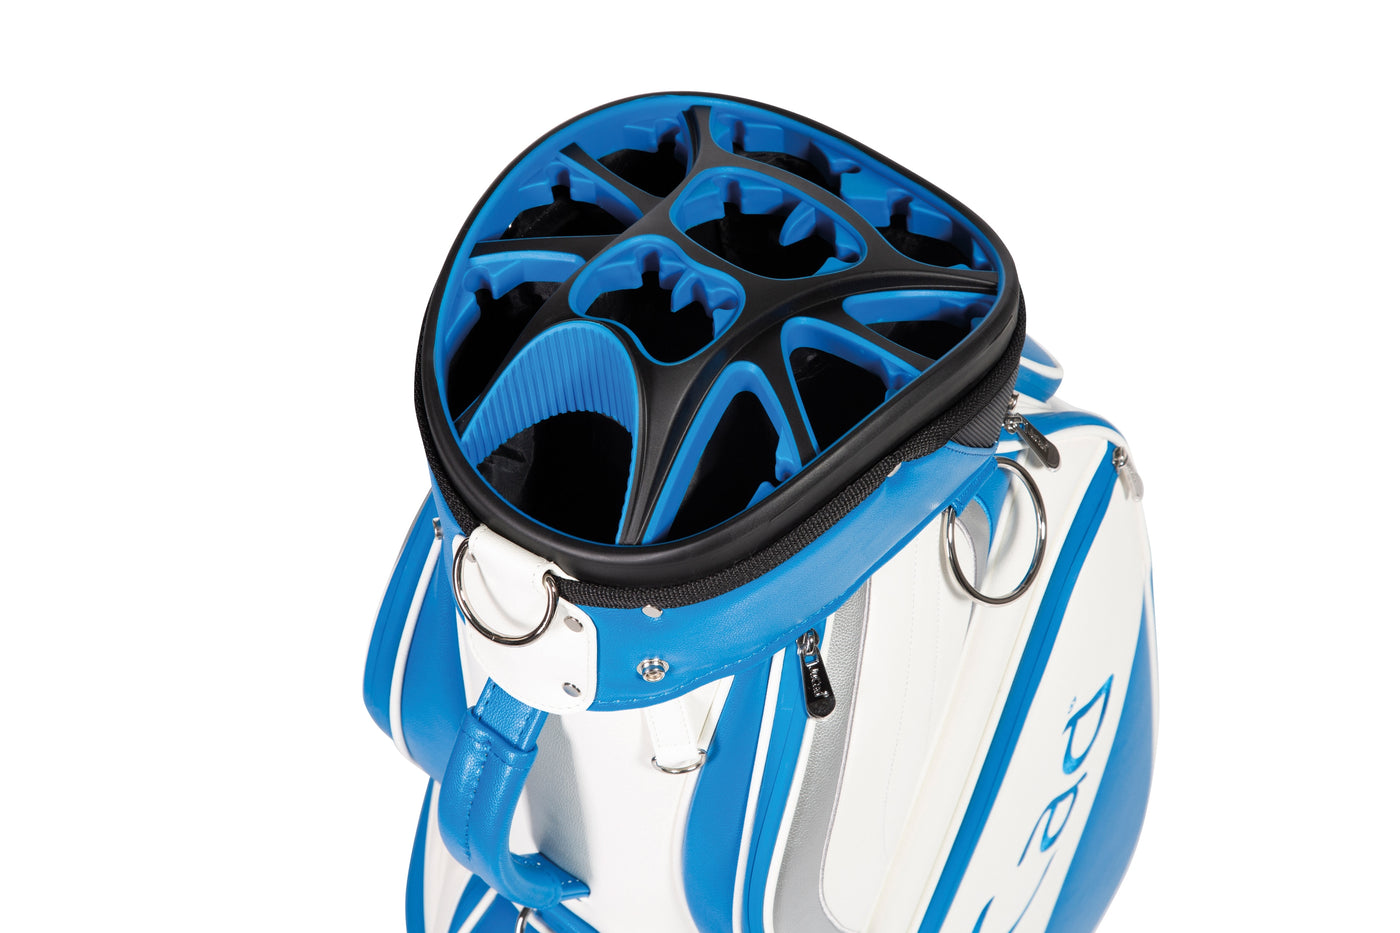 JuCad Golfbag Pro - the classic tour bag